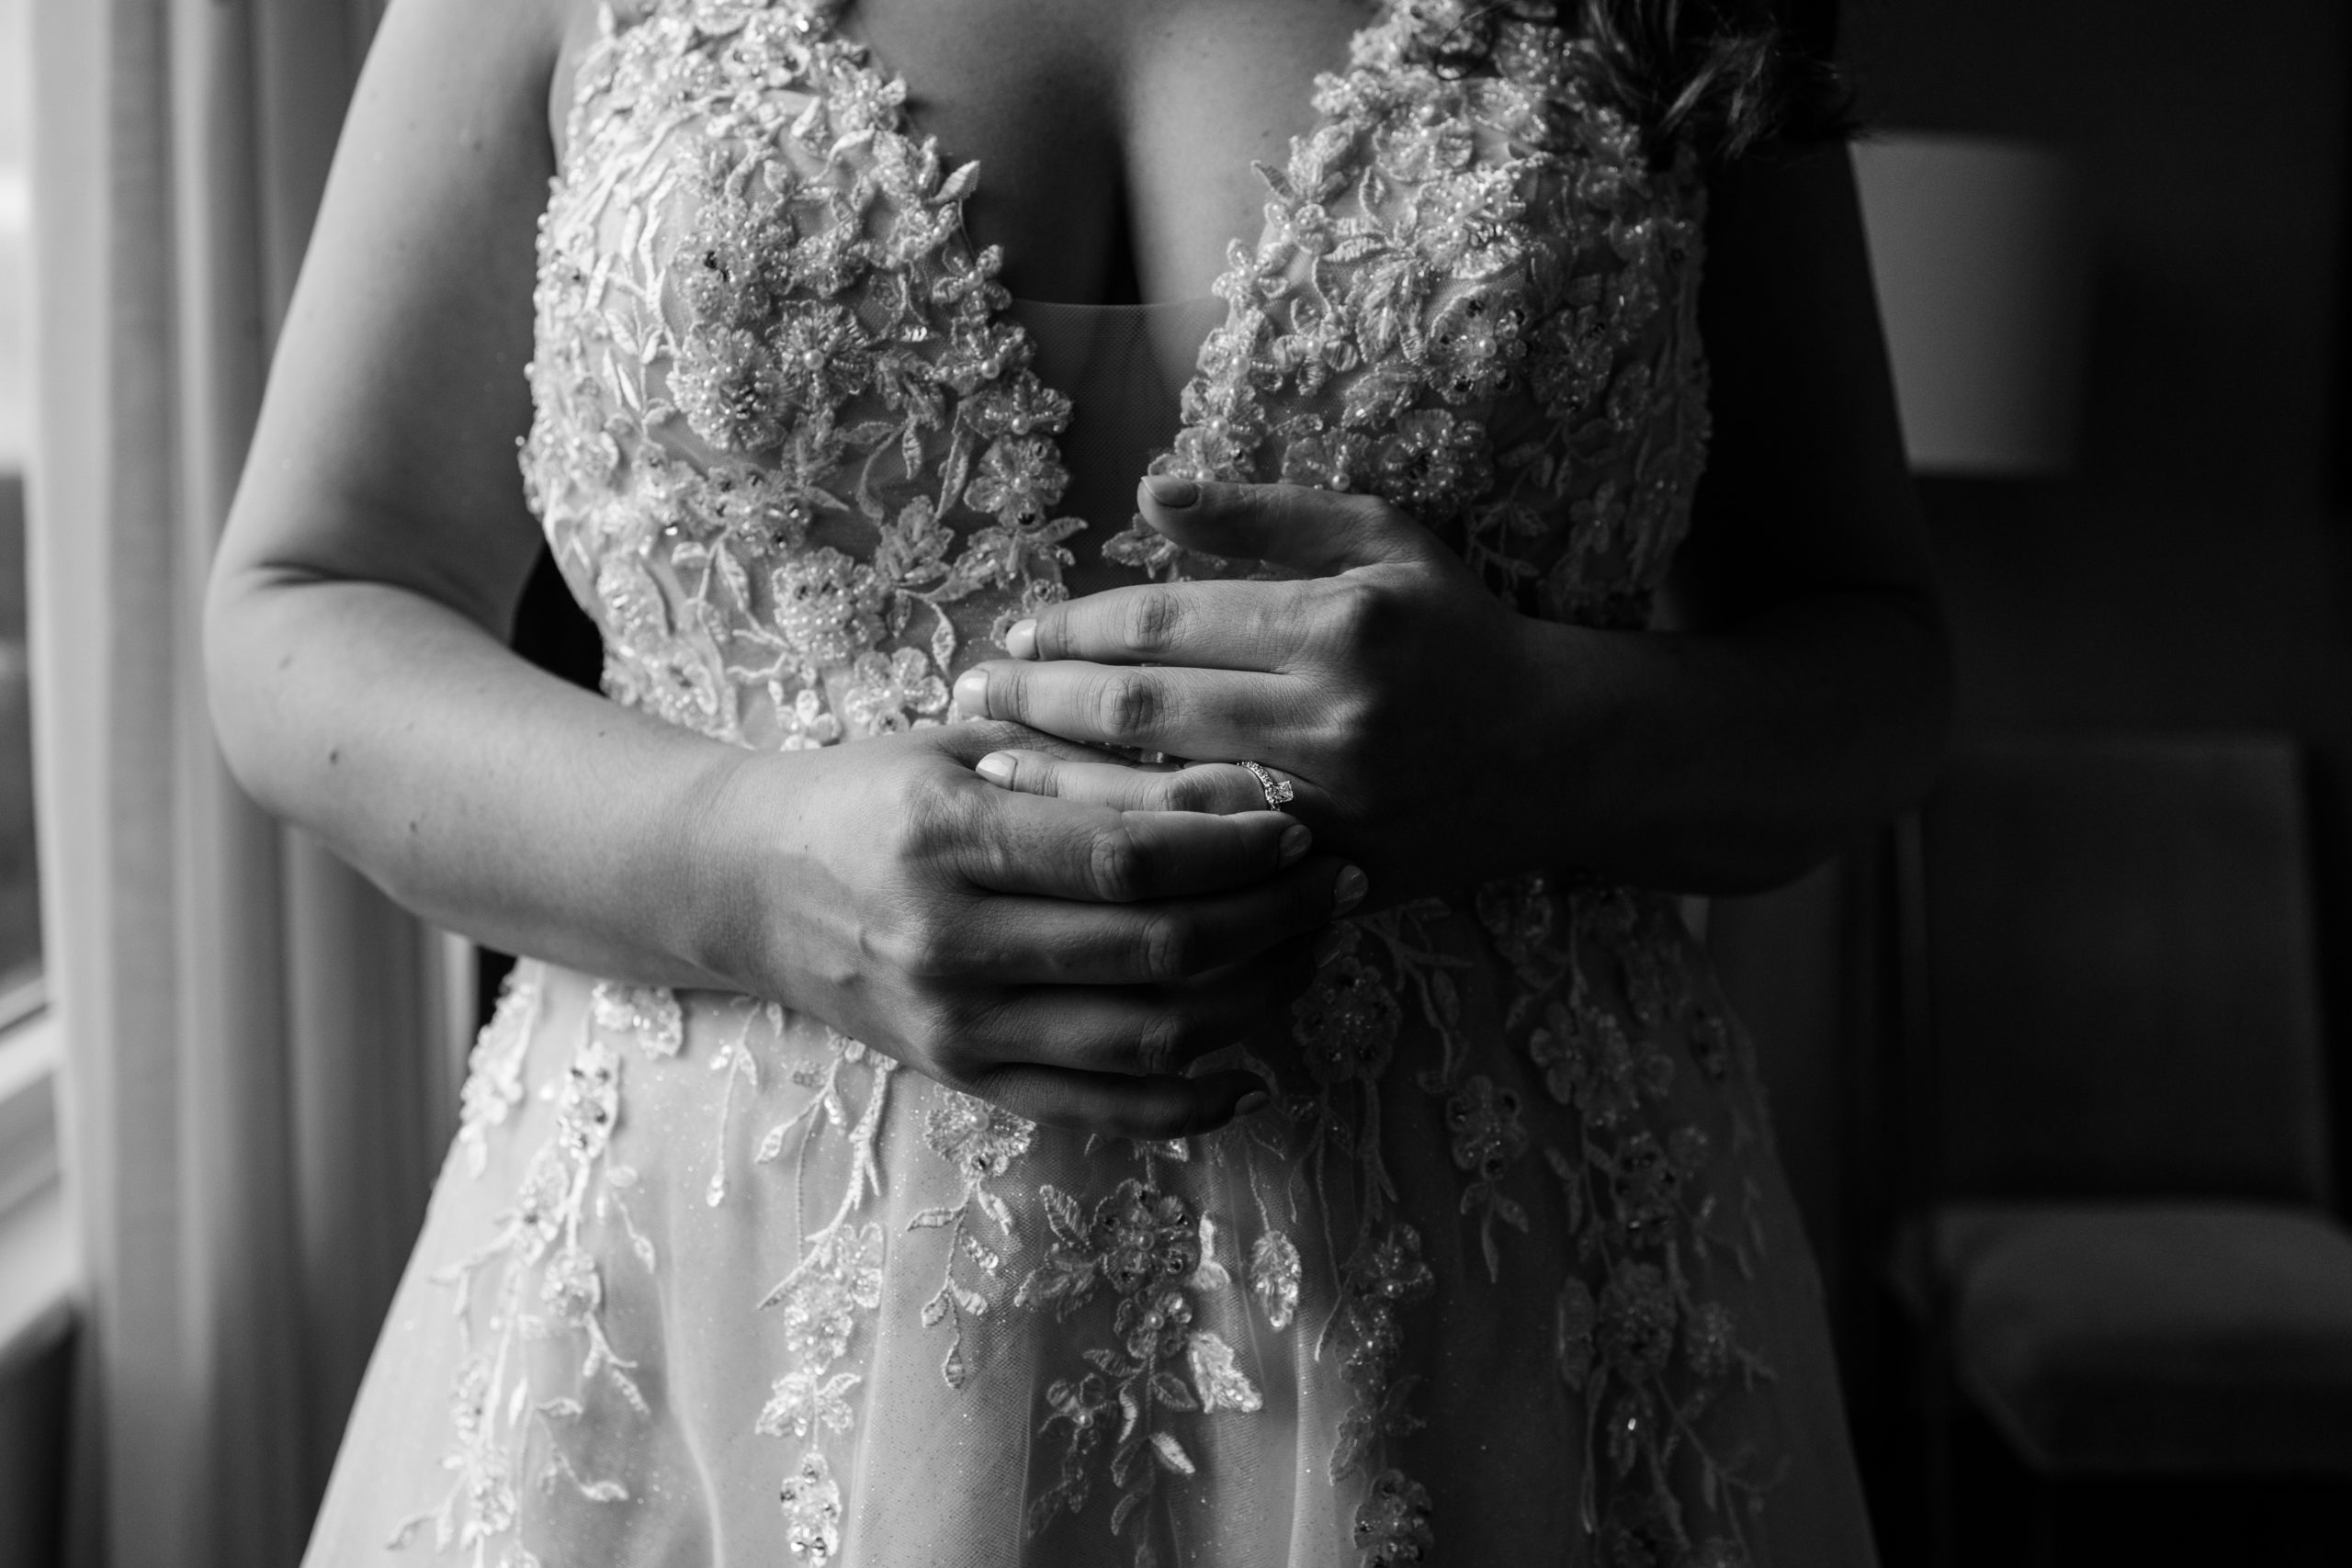 torso of woman in wedding dress, placing wedding ring on her own hand